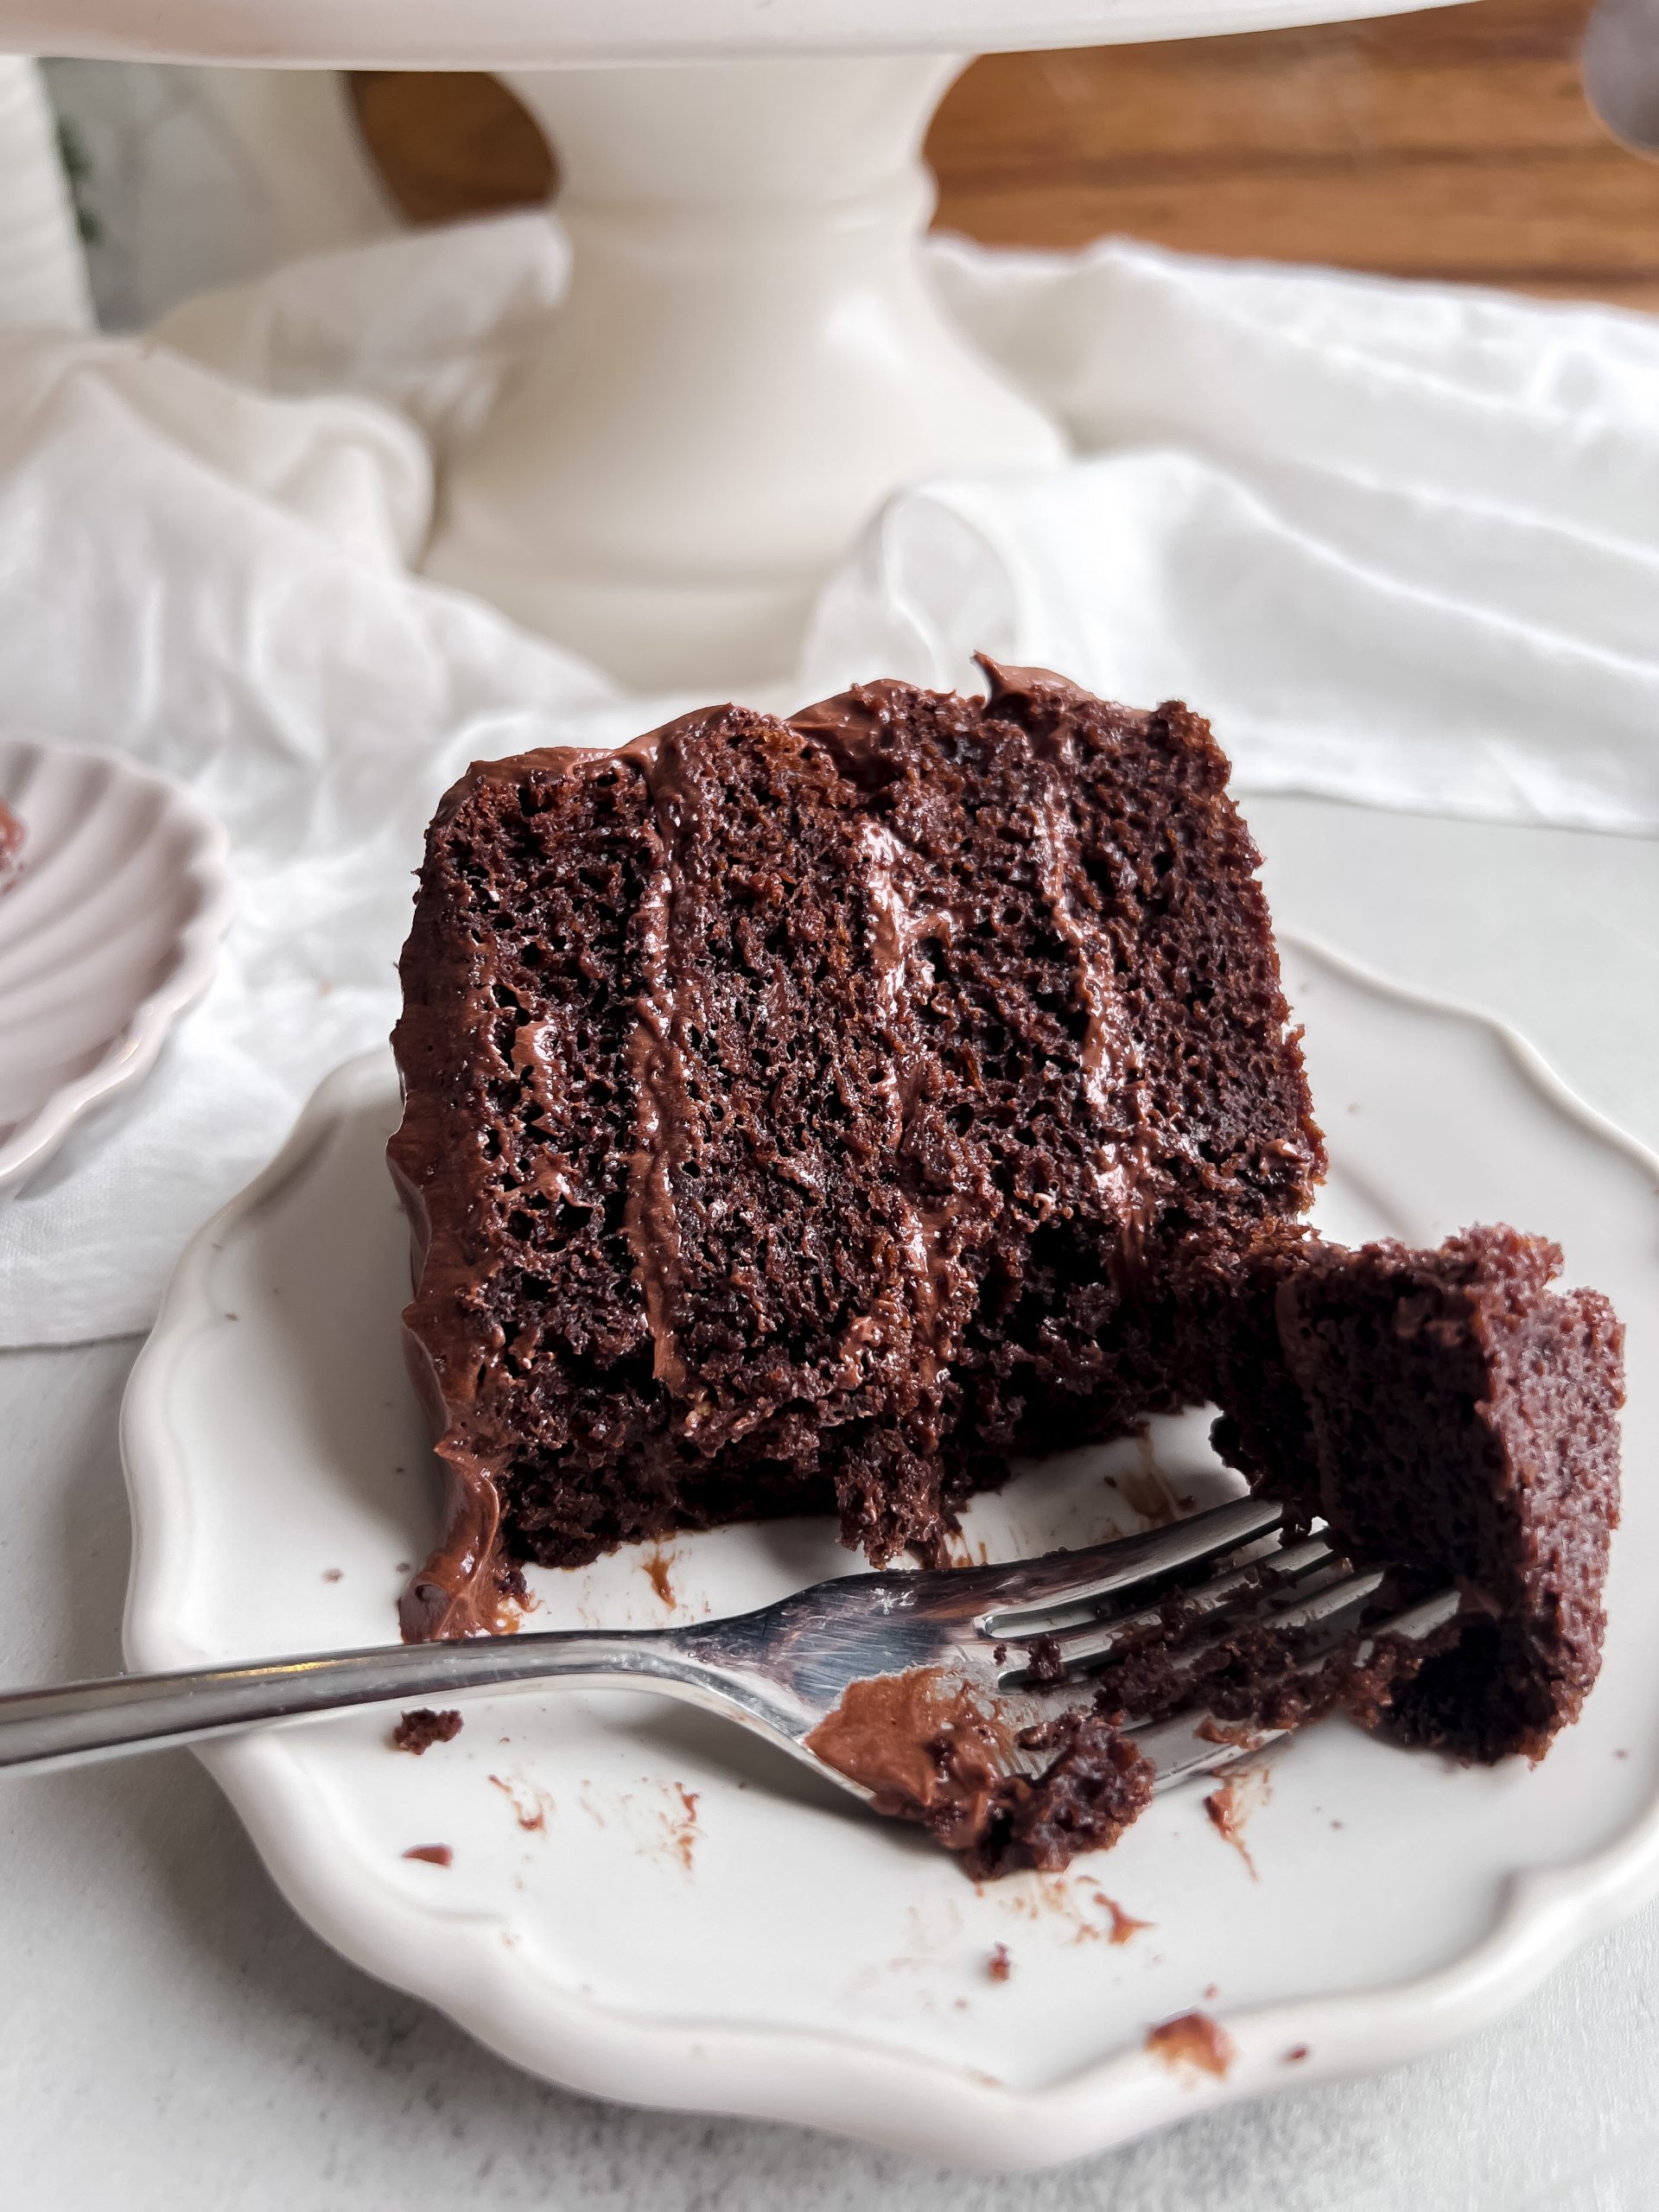 Close up shot of a slice of chocolate cake on a small plate with a fork taking out a bite